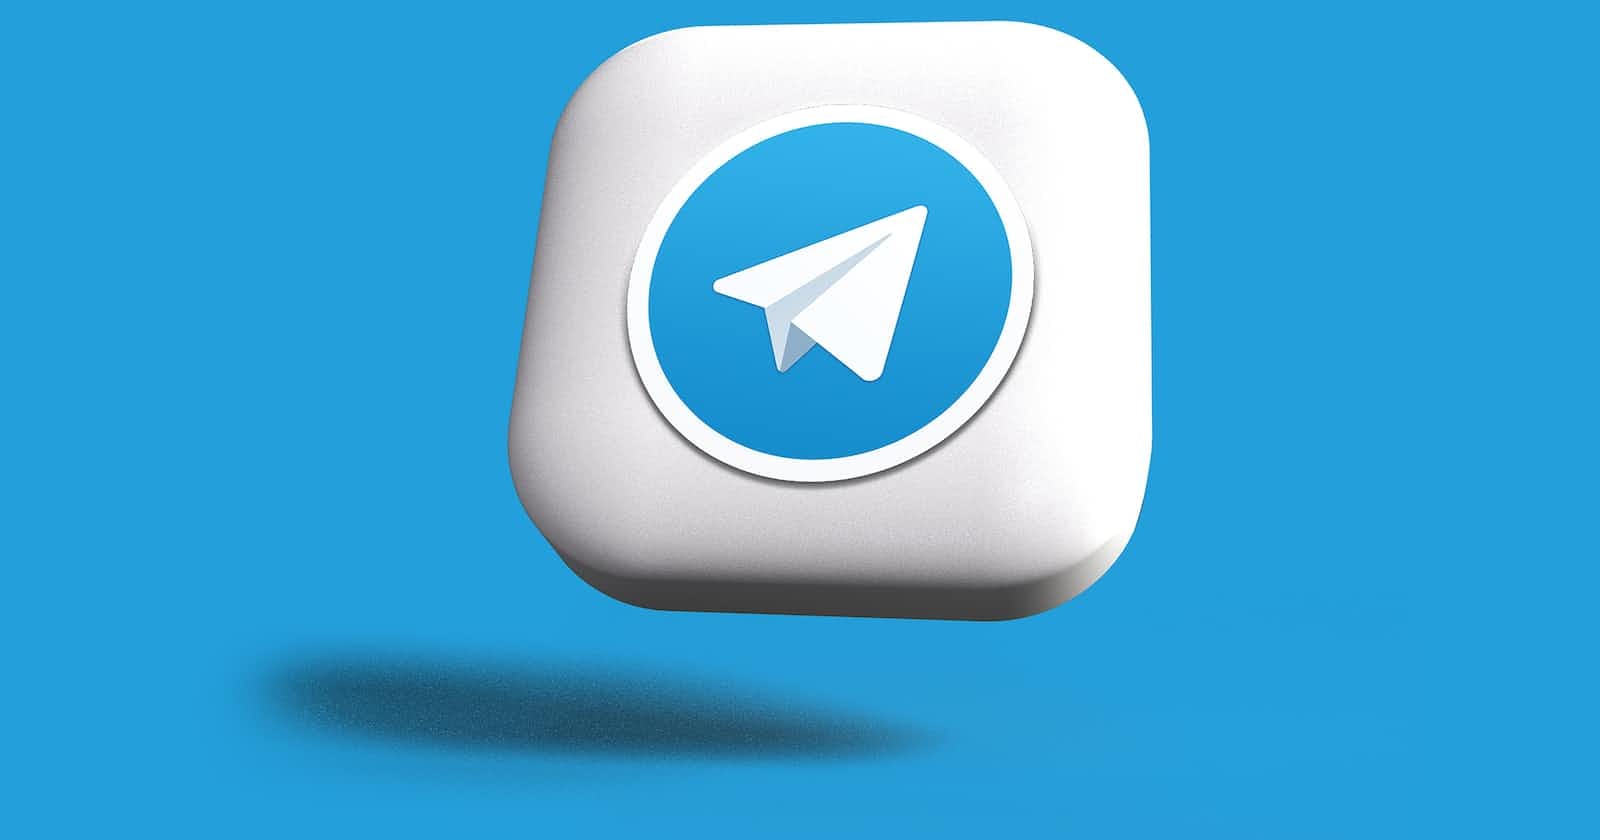 How to install Telegram on Deepin OS 20.7 or any other Debian-based Linux distribution?